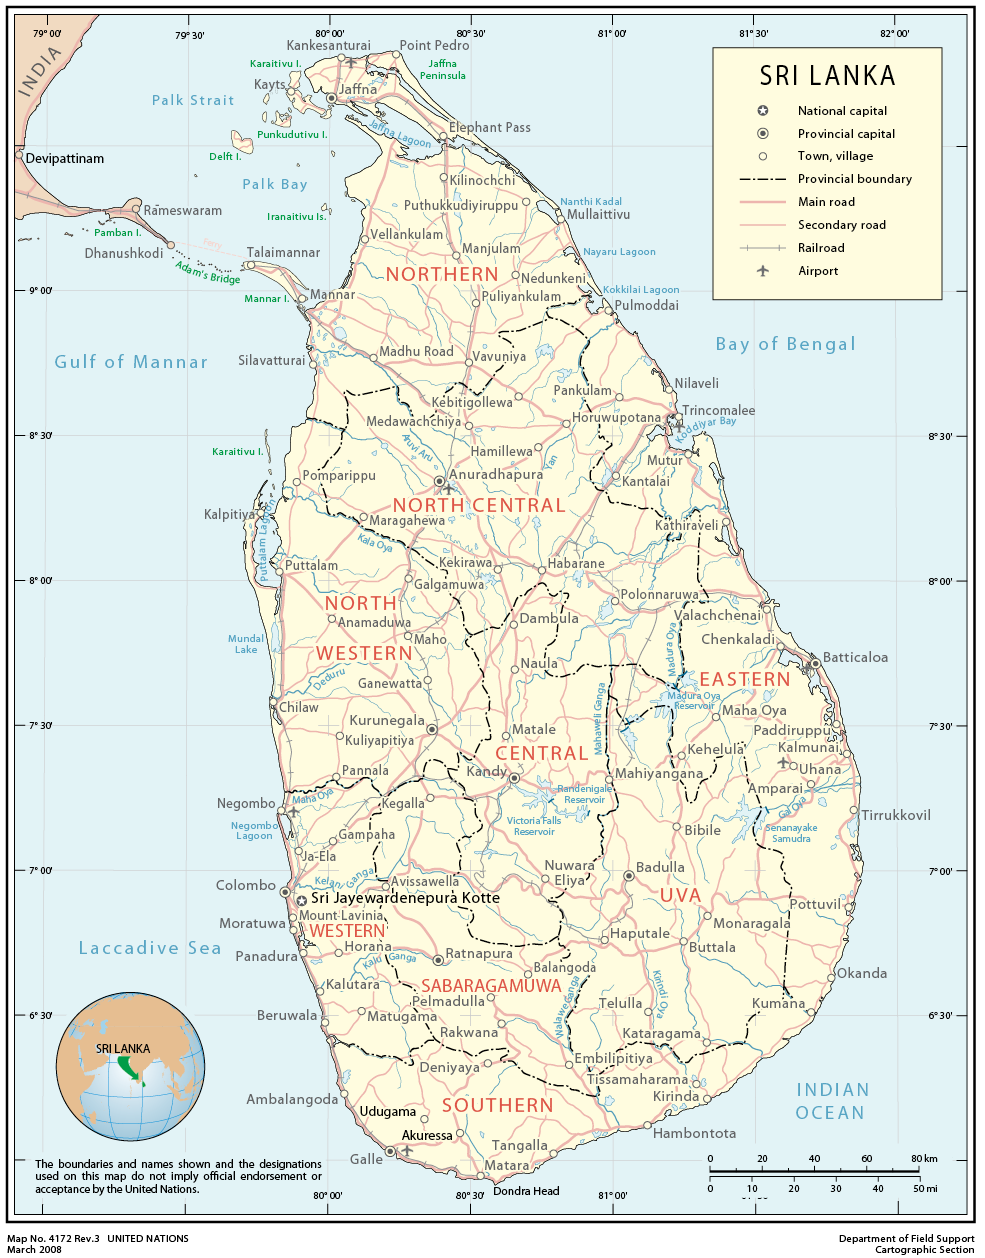 Chapter 9 Sri Lanka State Response To The Liberation Tigers Of Tamil